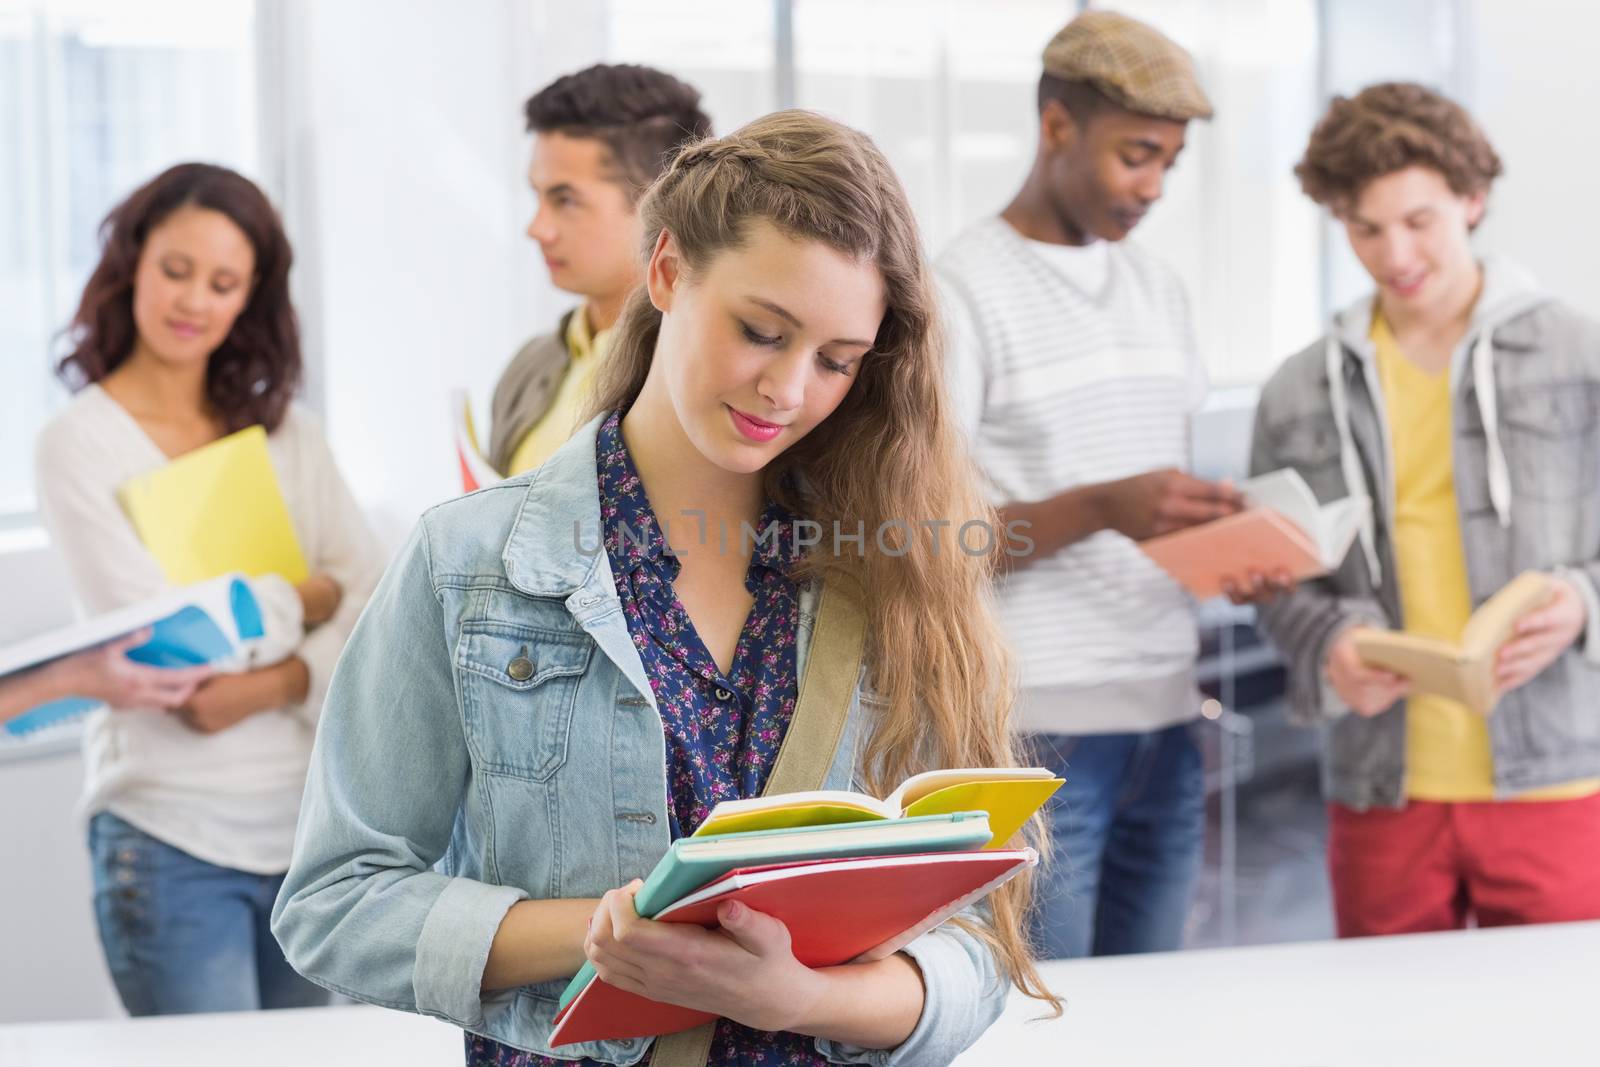 Fashion student reading her notes by Wavebreakmedia